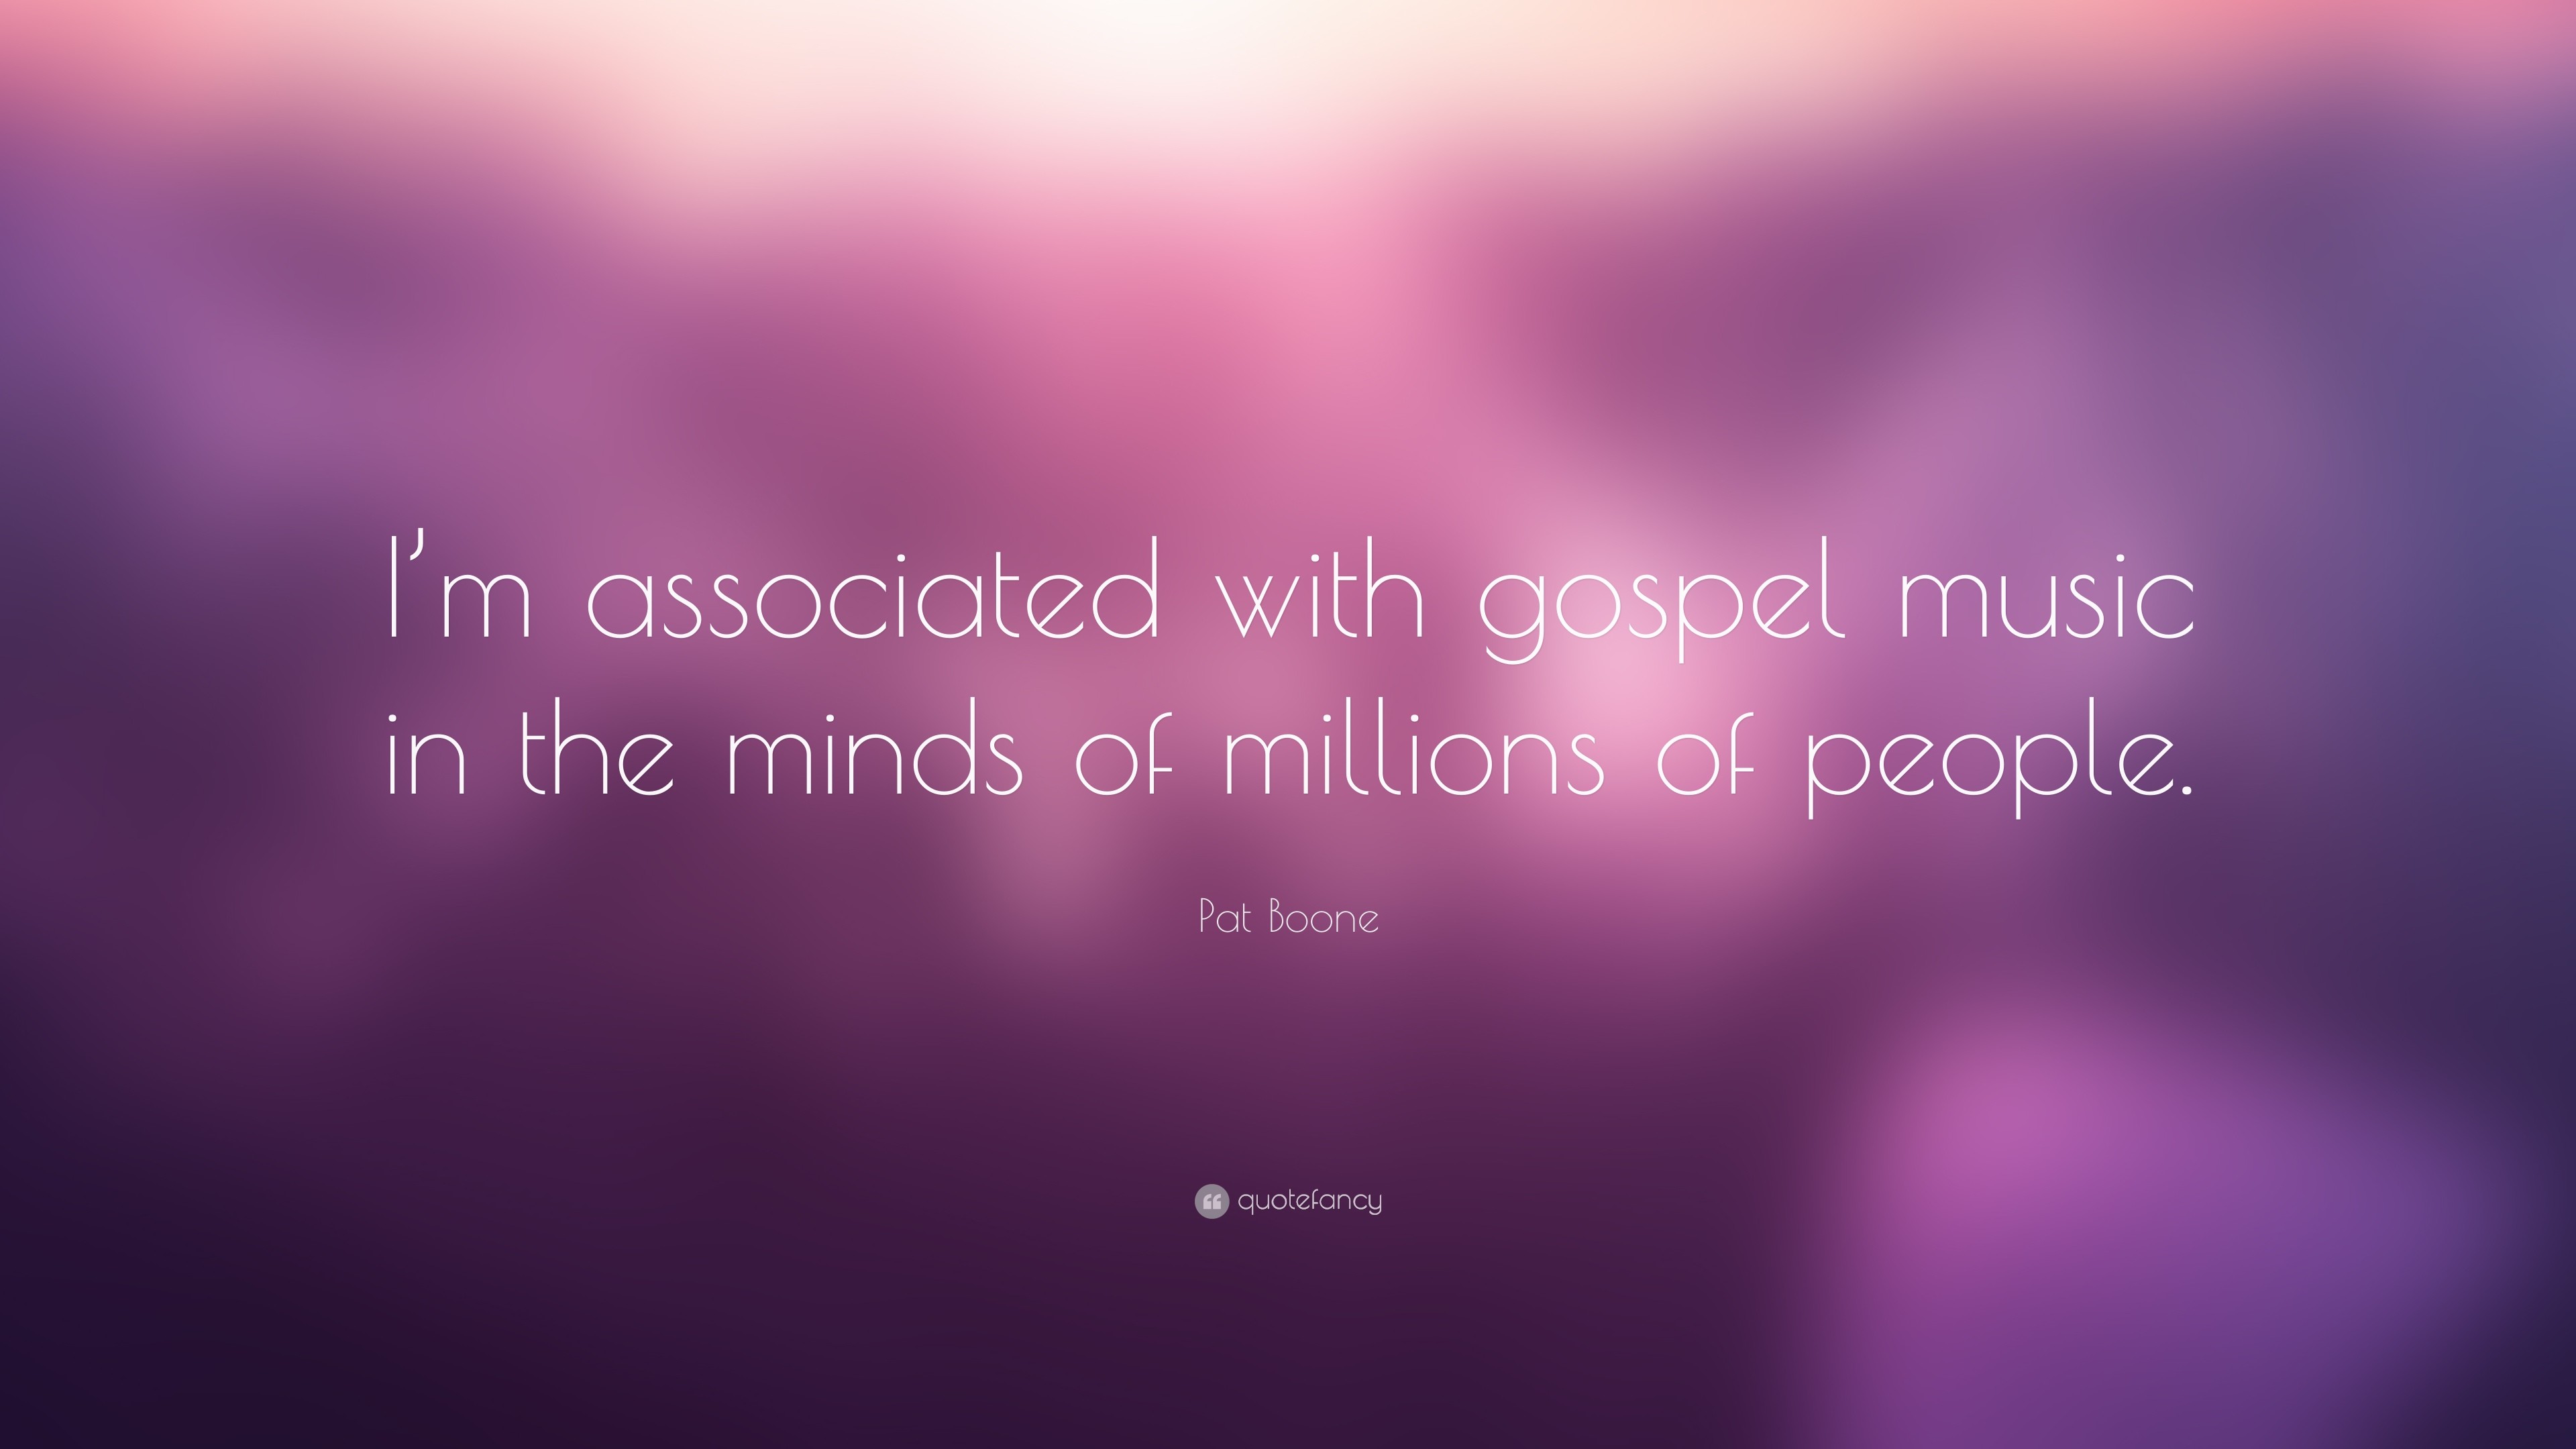 3840x2160 Pat Boone Quote: “I'm associated with gospel music in the minds of